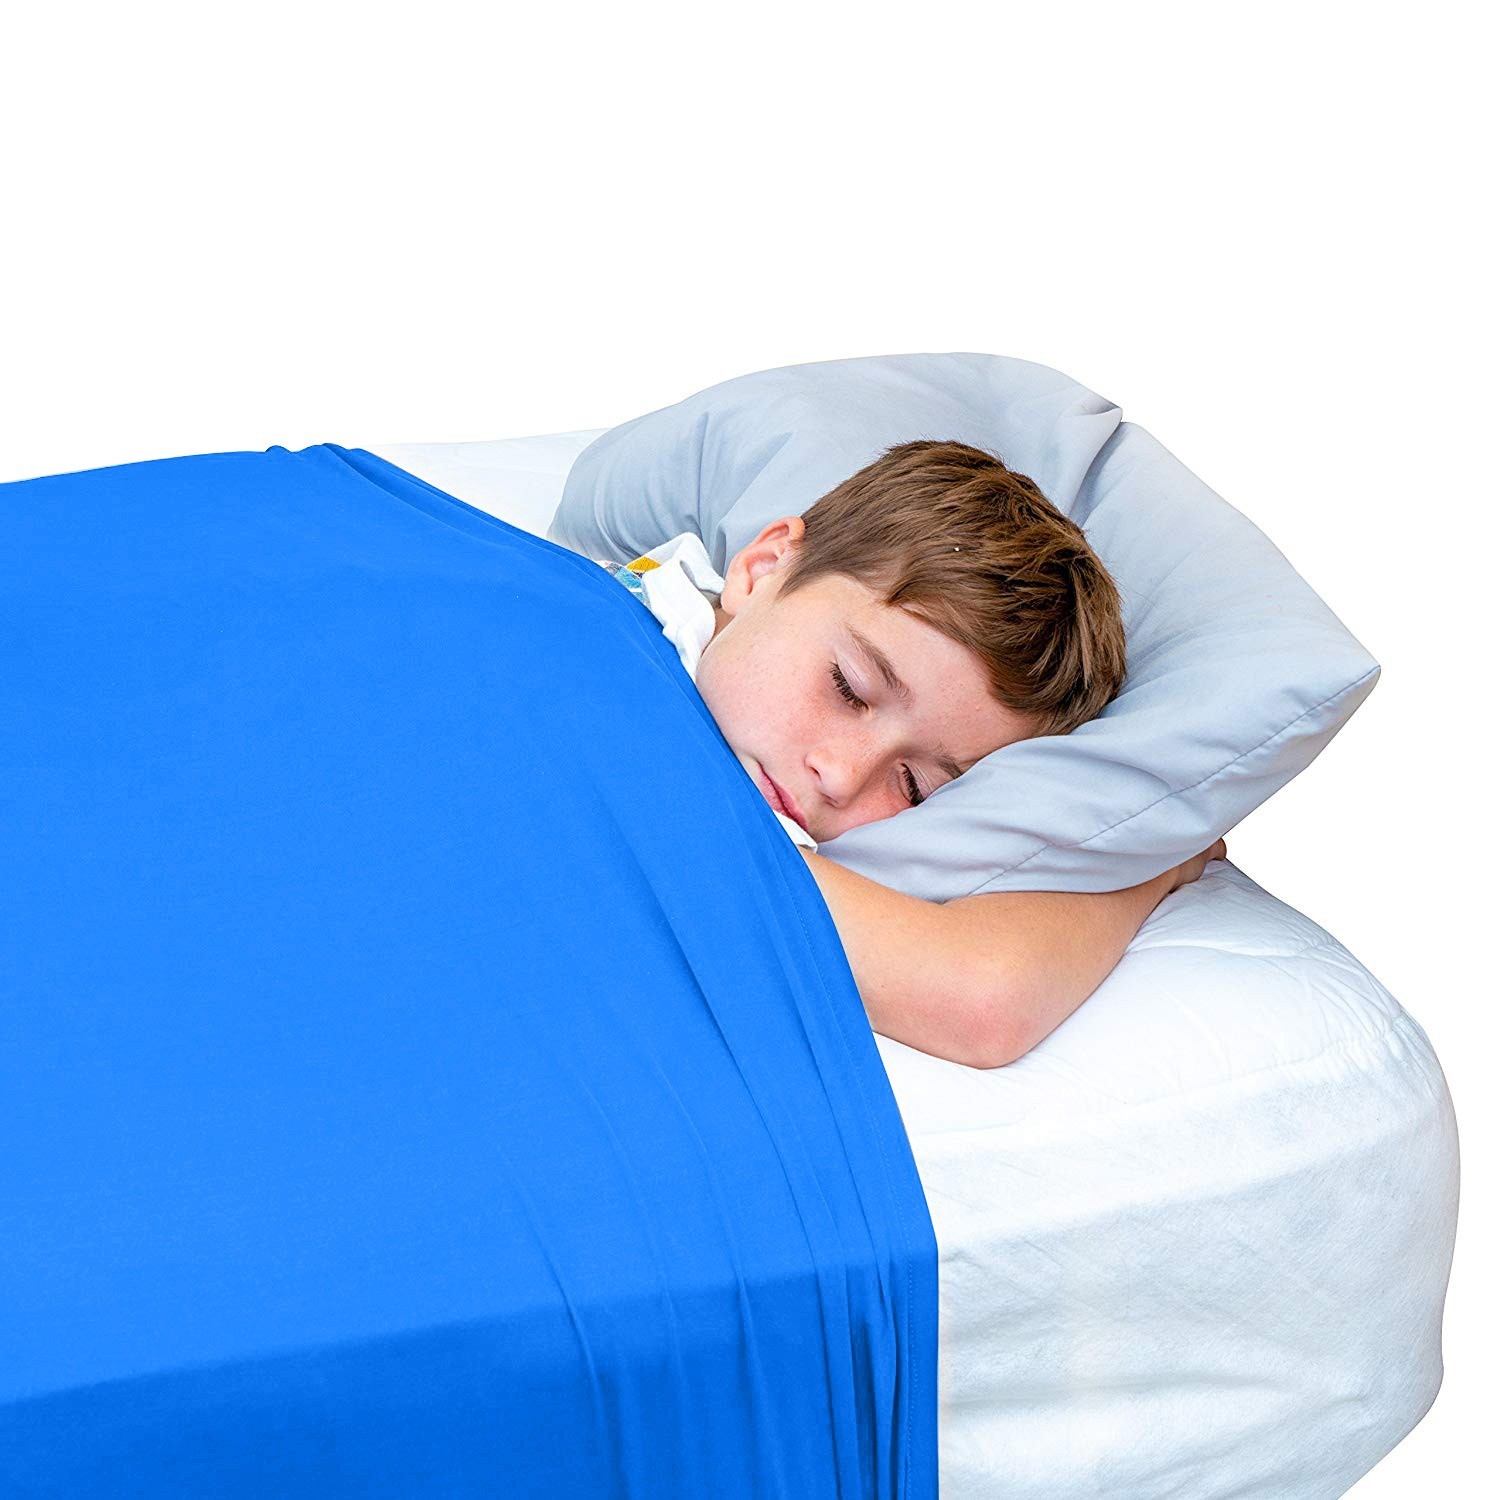 Alternative to Heavy Weighted Blankets TOPARCHERY Sensory Compression Bed Sheet for Sinlgle Bed Mattress Single, Blue Stretchy Breathable Firm Pressure for Calming & Relaxing Sleep 